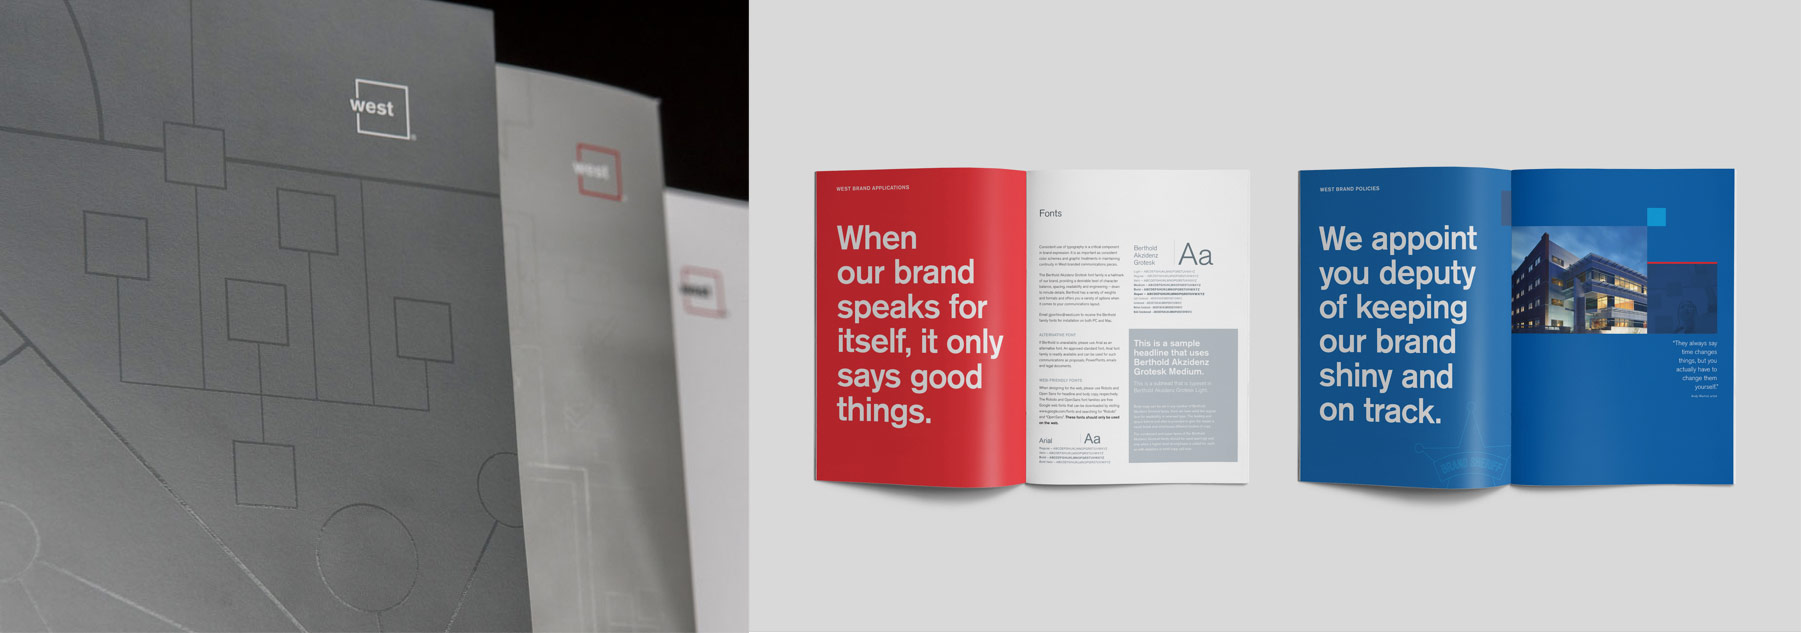 West Corporation - Annual Report